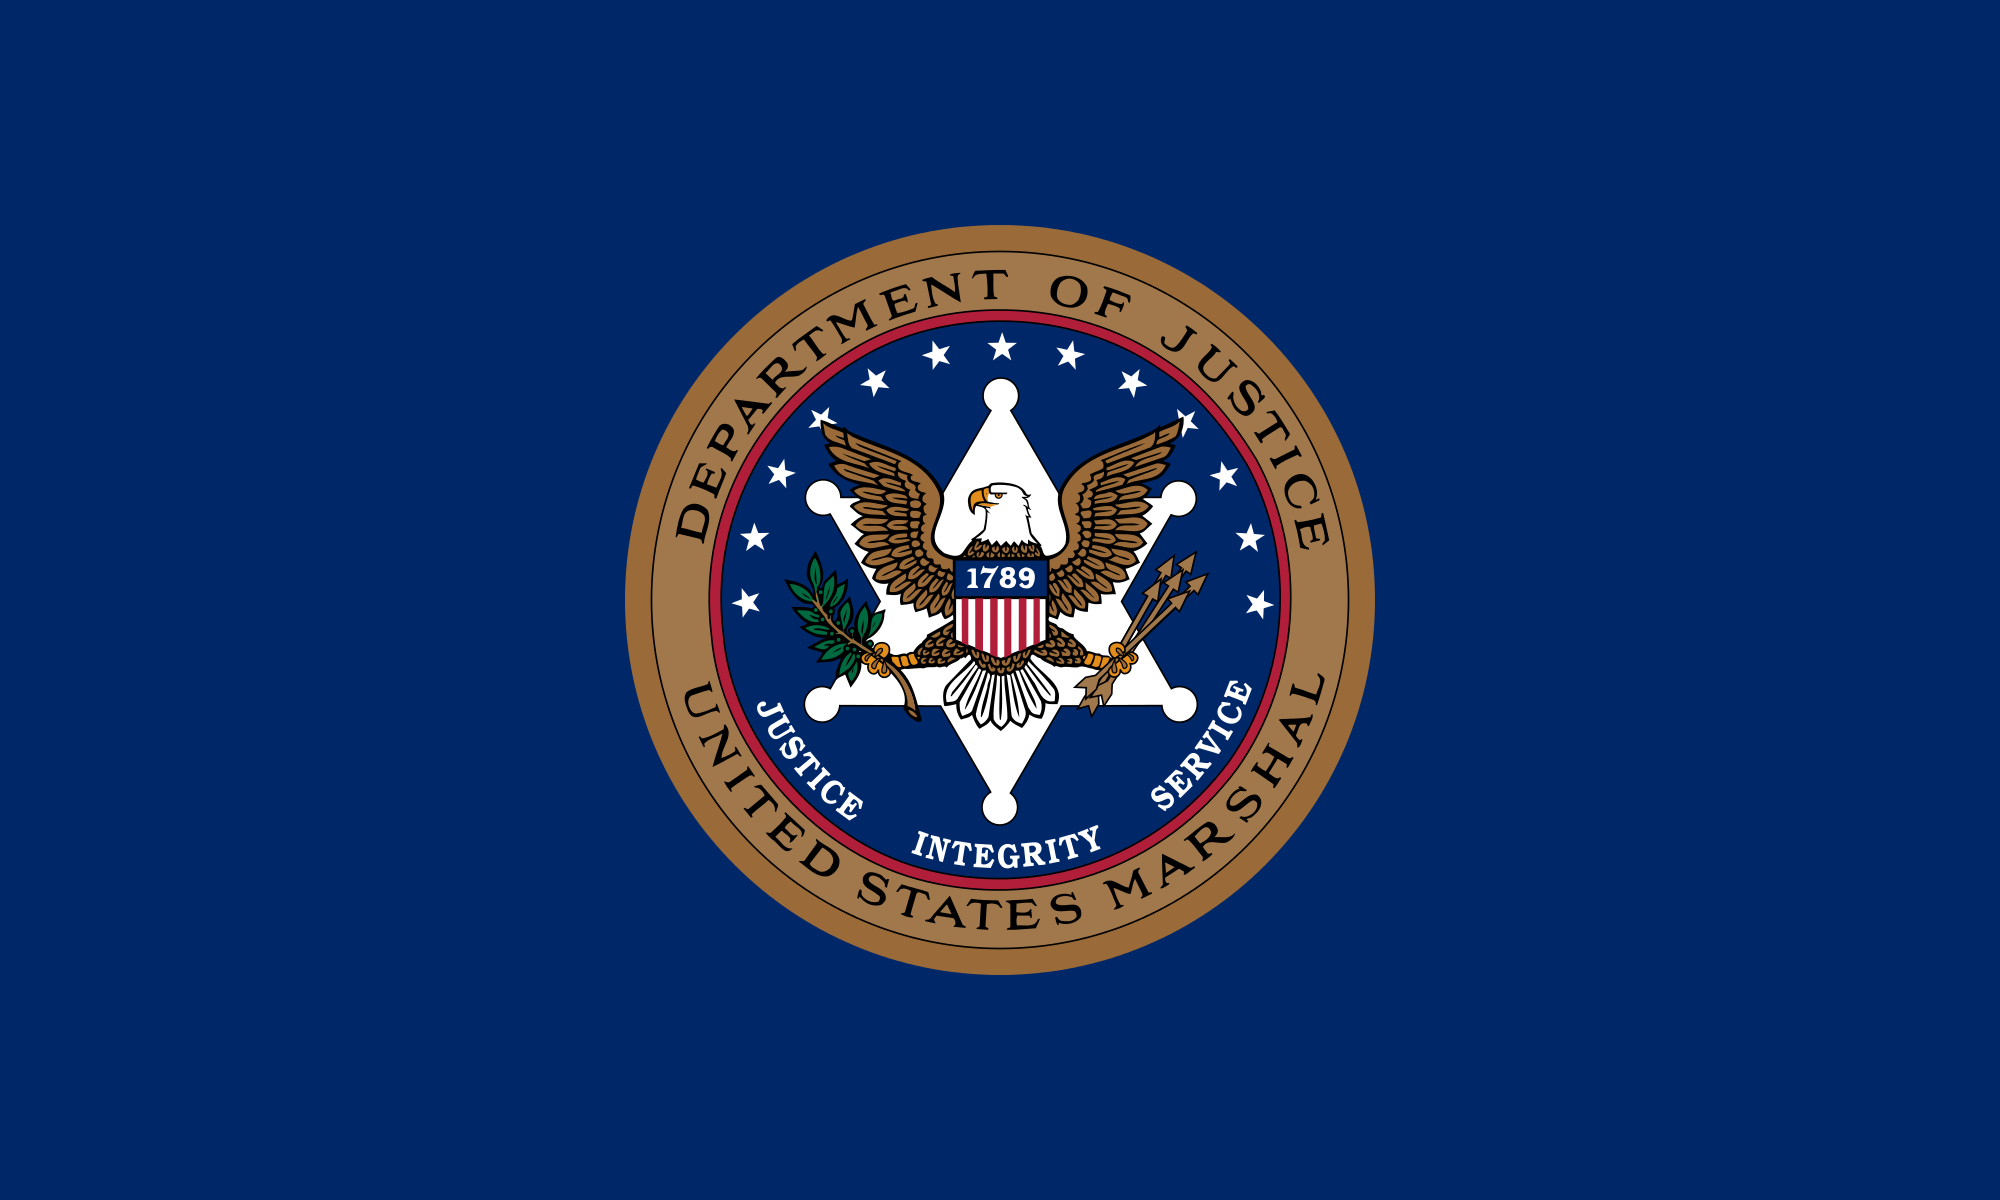 FileFlag of the United States Marshals Servicepng